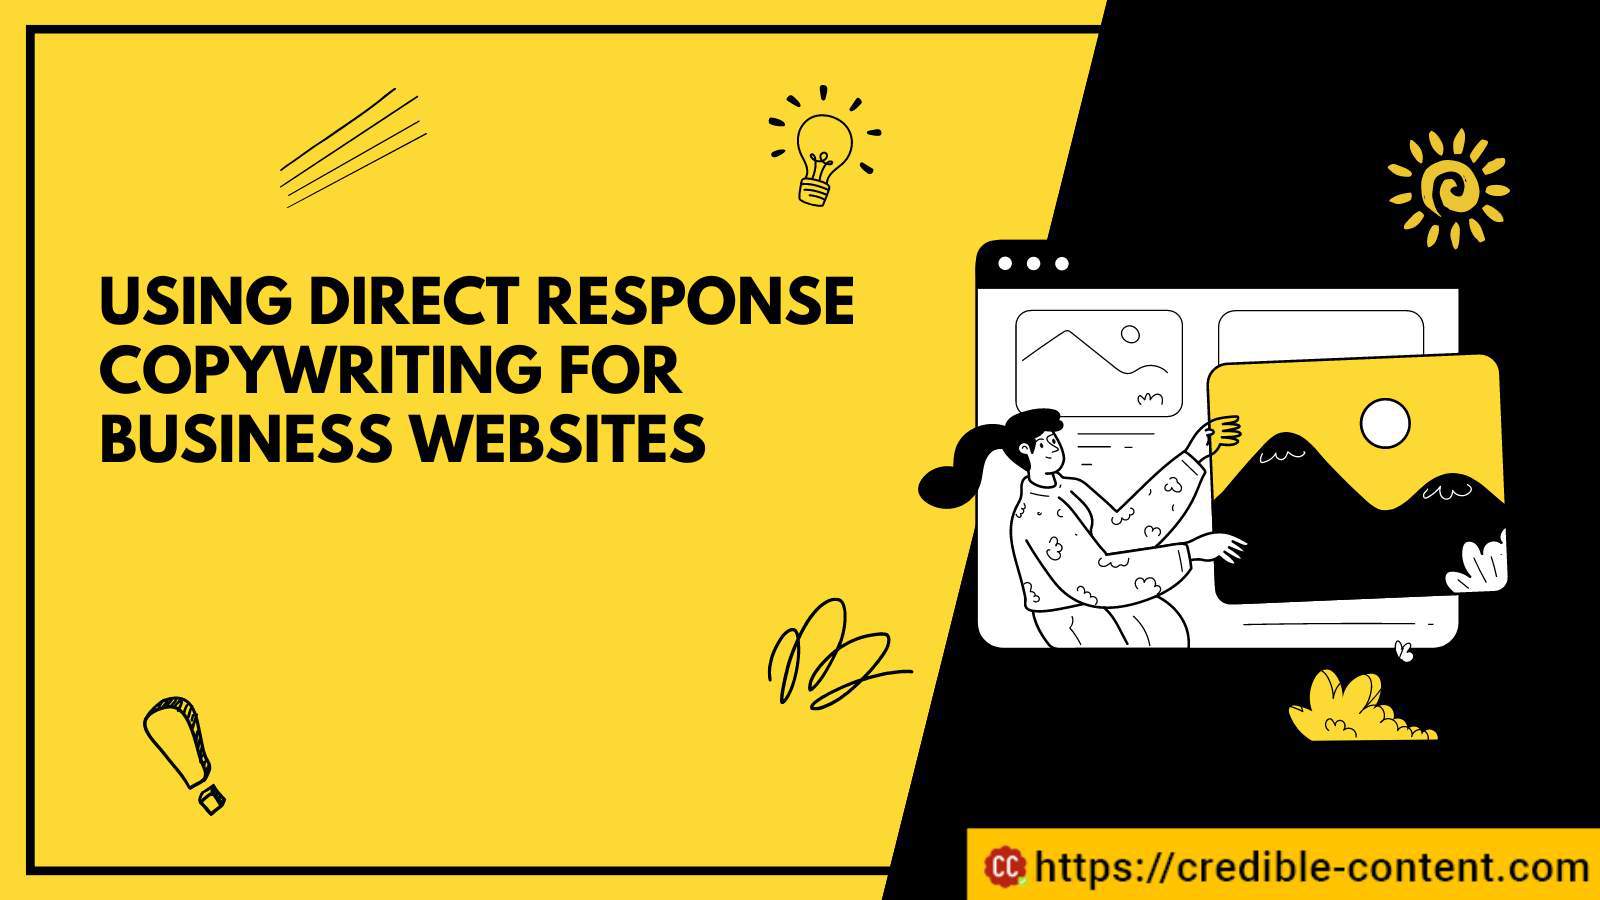 Using direct response copywriting for business websites